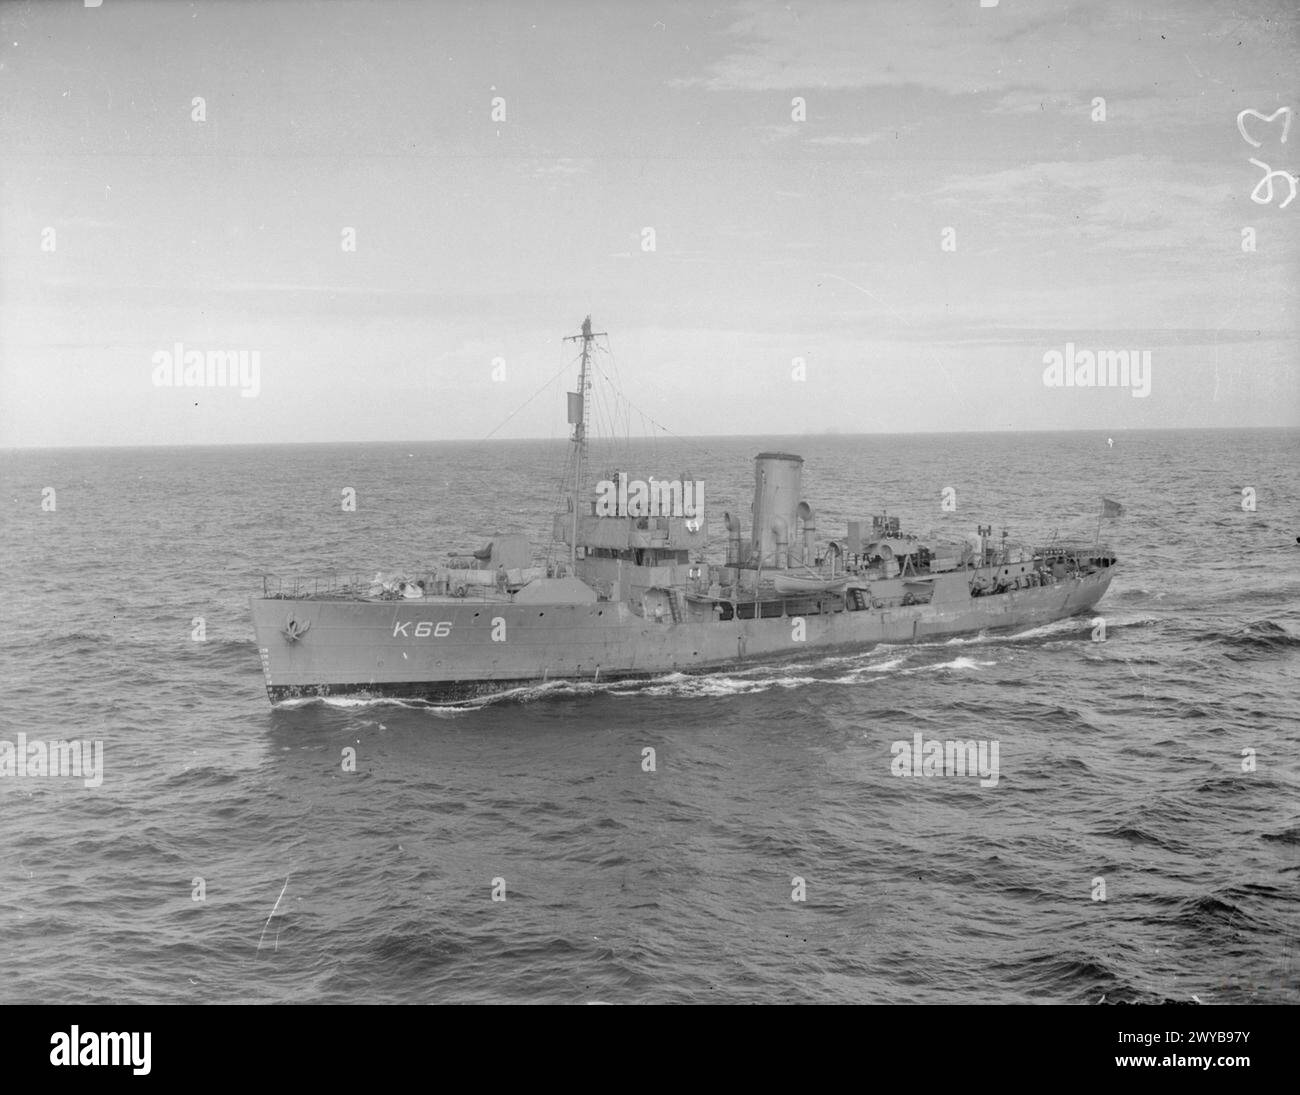 THE ROYAL NAVY DURING THE SECOND WORLD WAR - HMS BEGONIA underway at sea. , Royal Navy, HMS Begonia, Corvette, (1942) Stock Photo